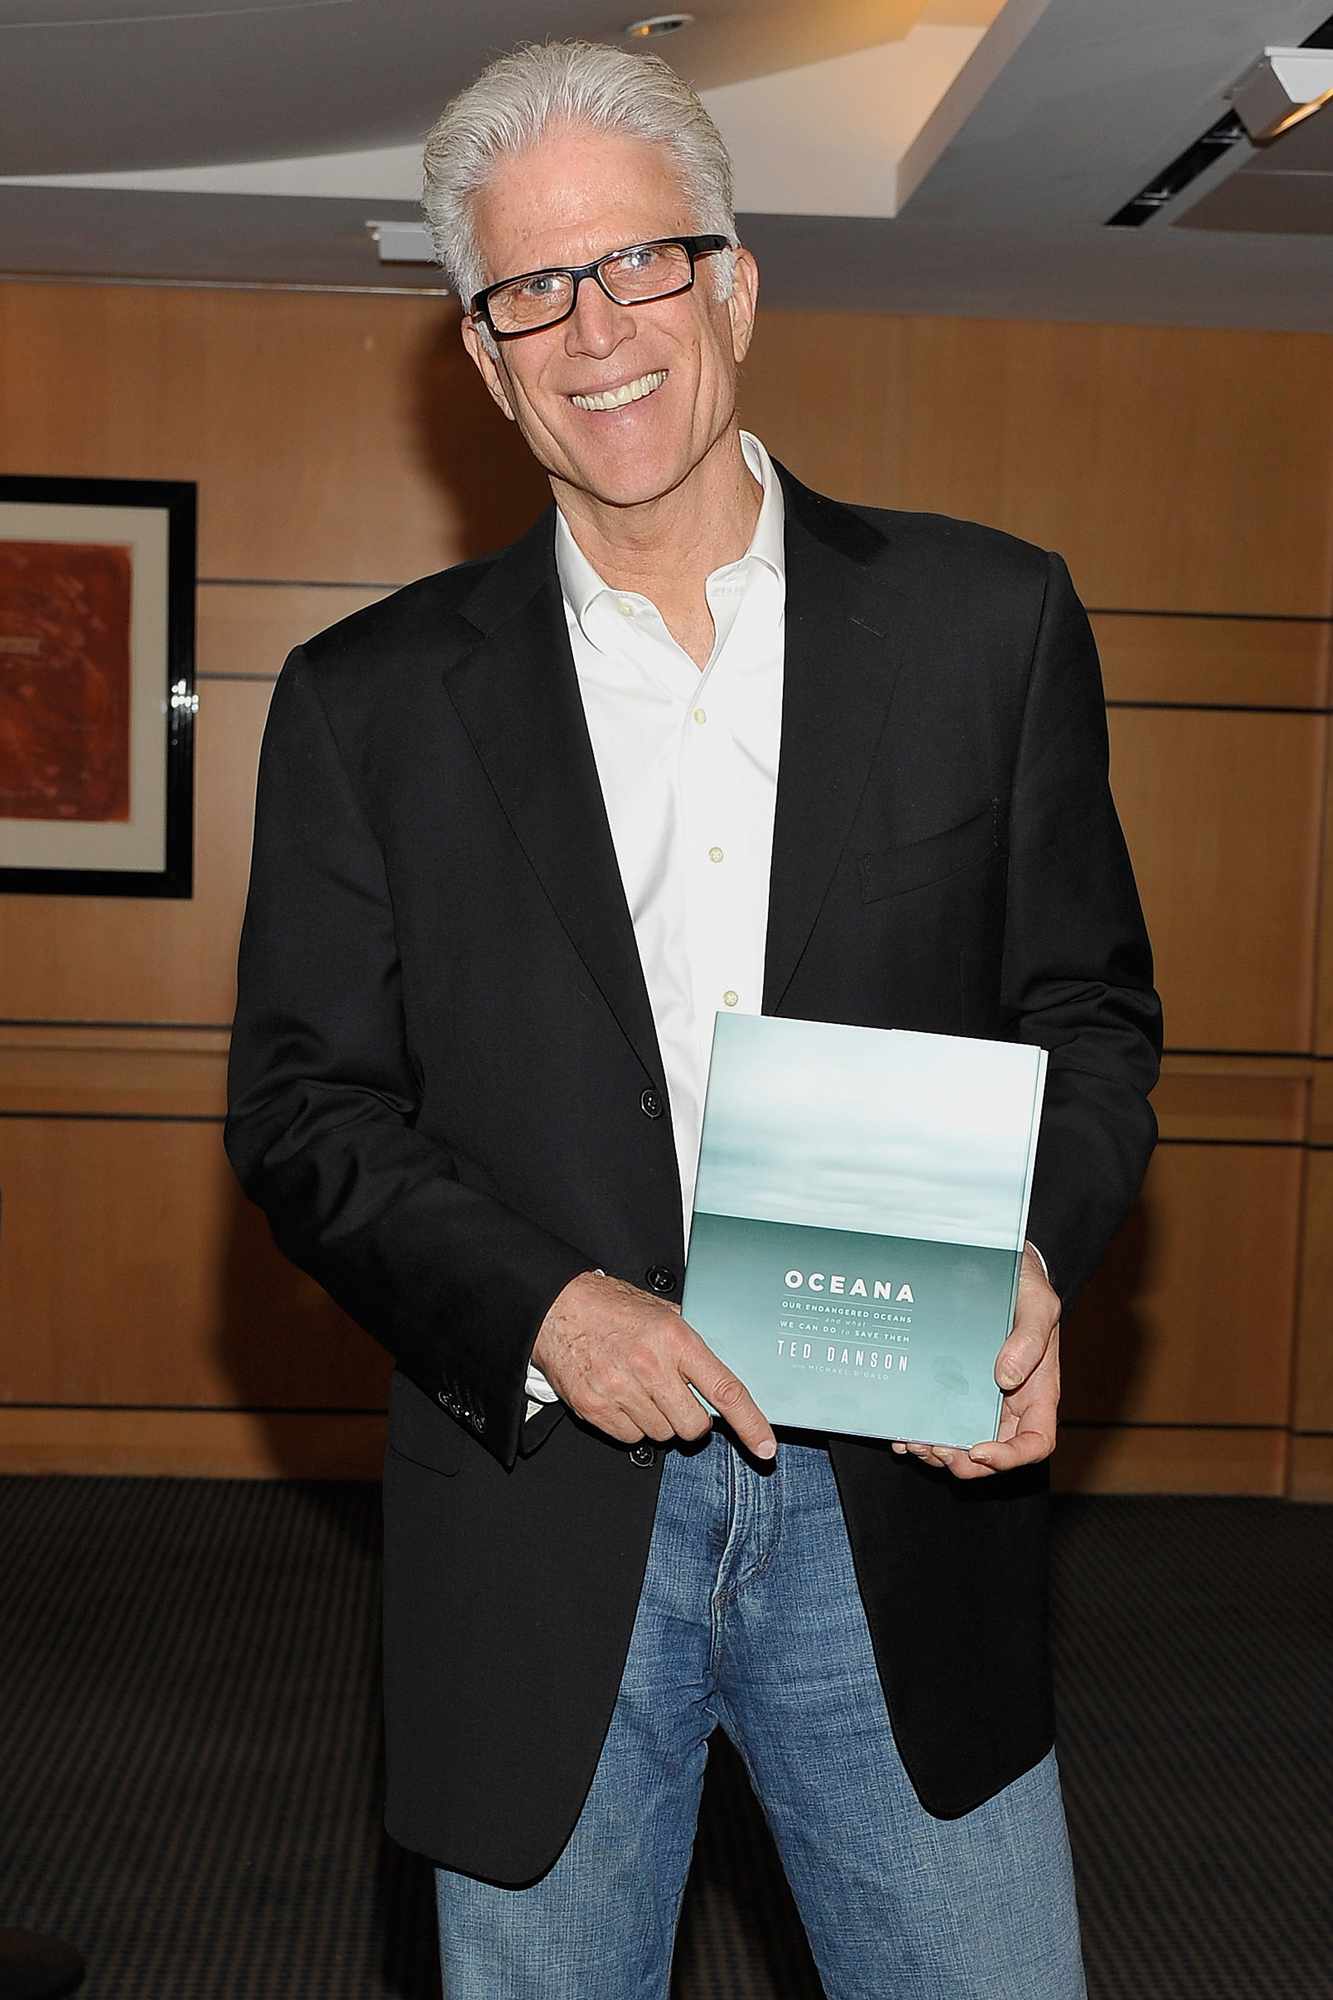 Actor/environmentalist Ted Danson signs copies of his new book "Oceana" at the Skirball Center on March 18, 2011 in Los Angeles, California.